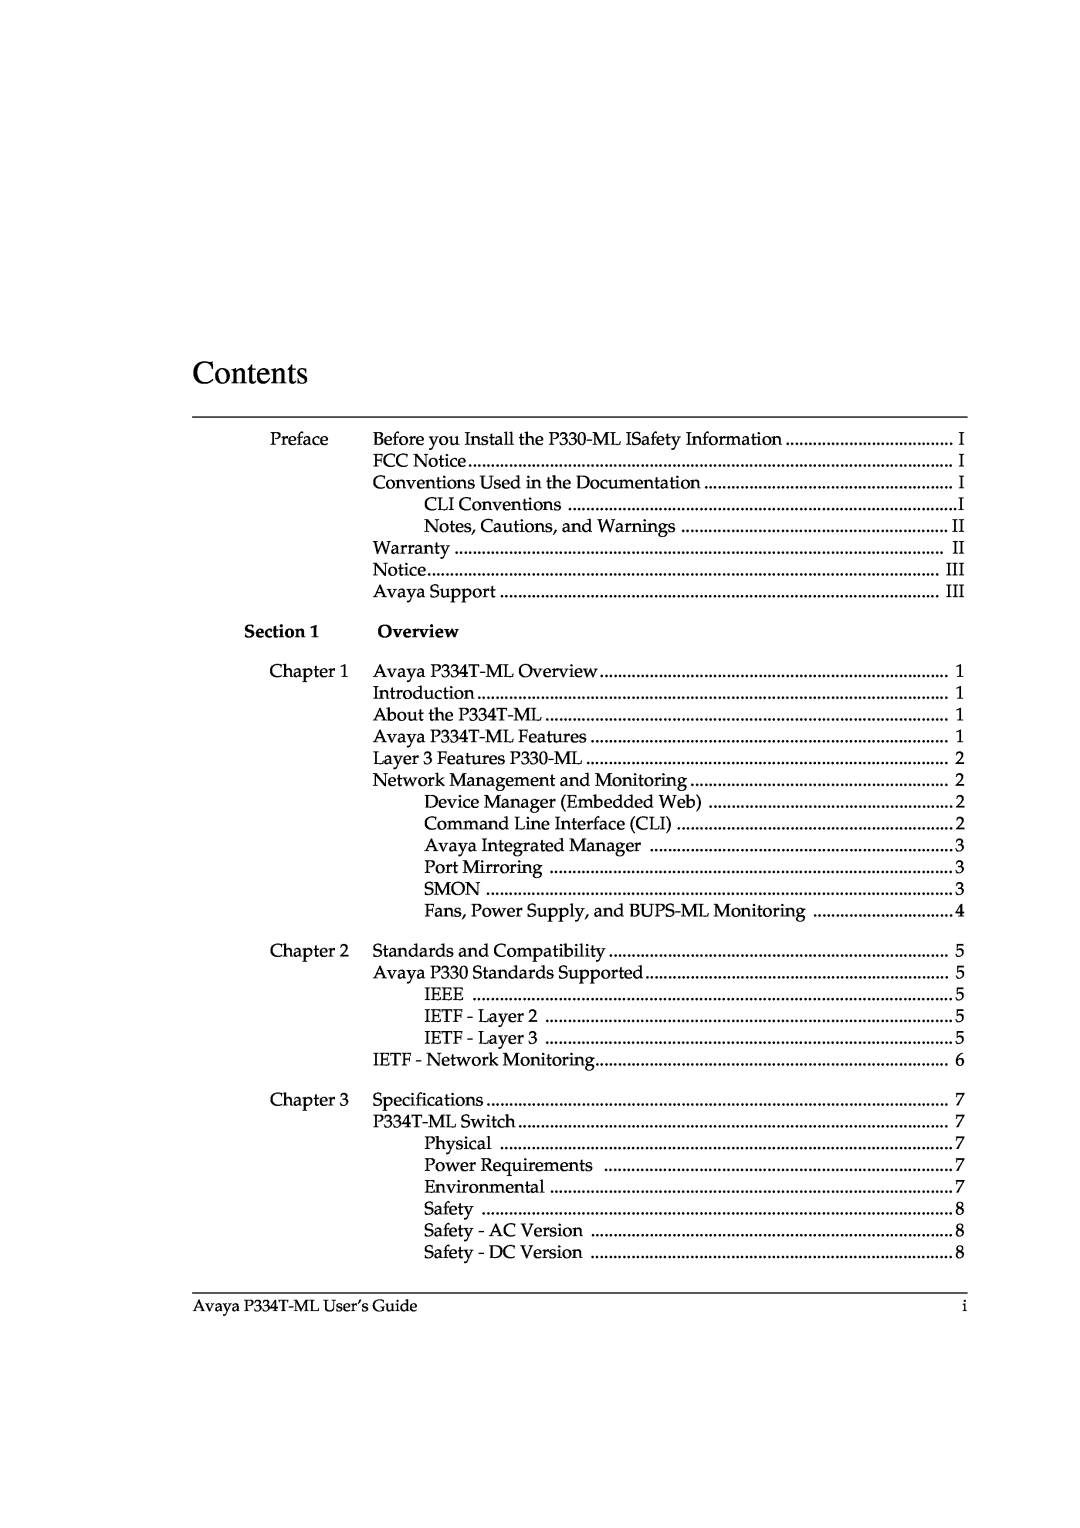 Avaya P3343T-ML manual Contents, Section, Overview 